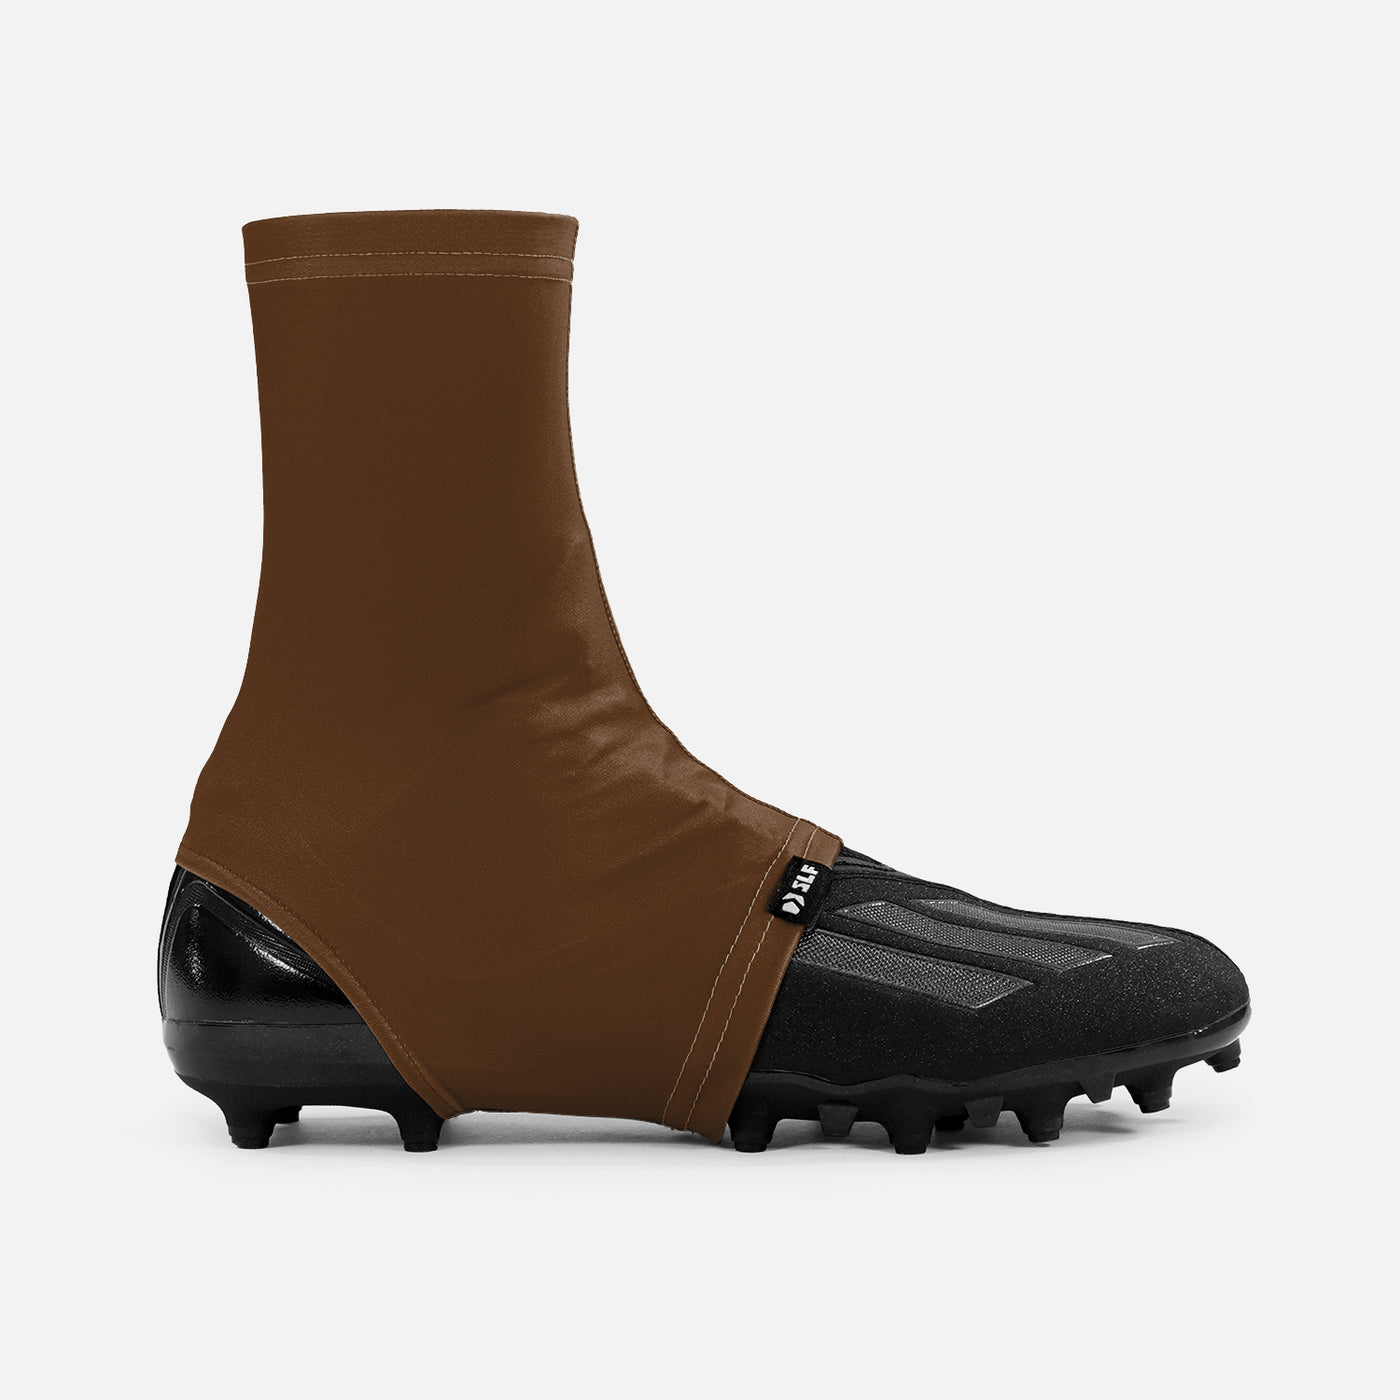 Hue Brown Spats / Cleat Covers